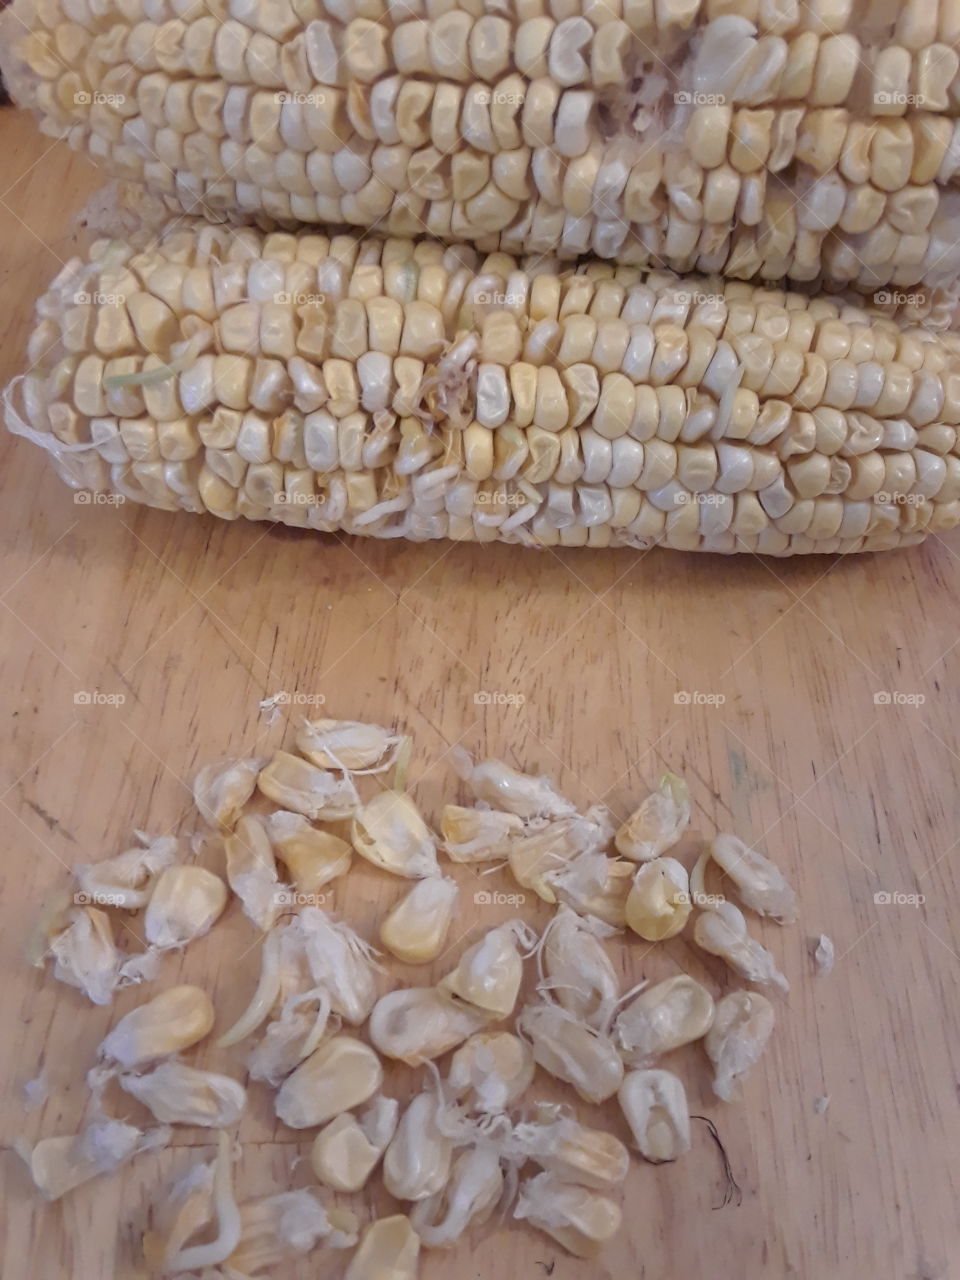 Store bought Ear of corn Gerimation